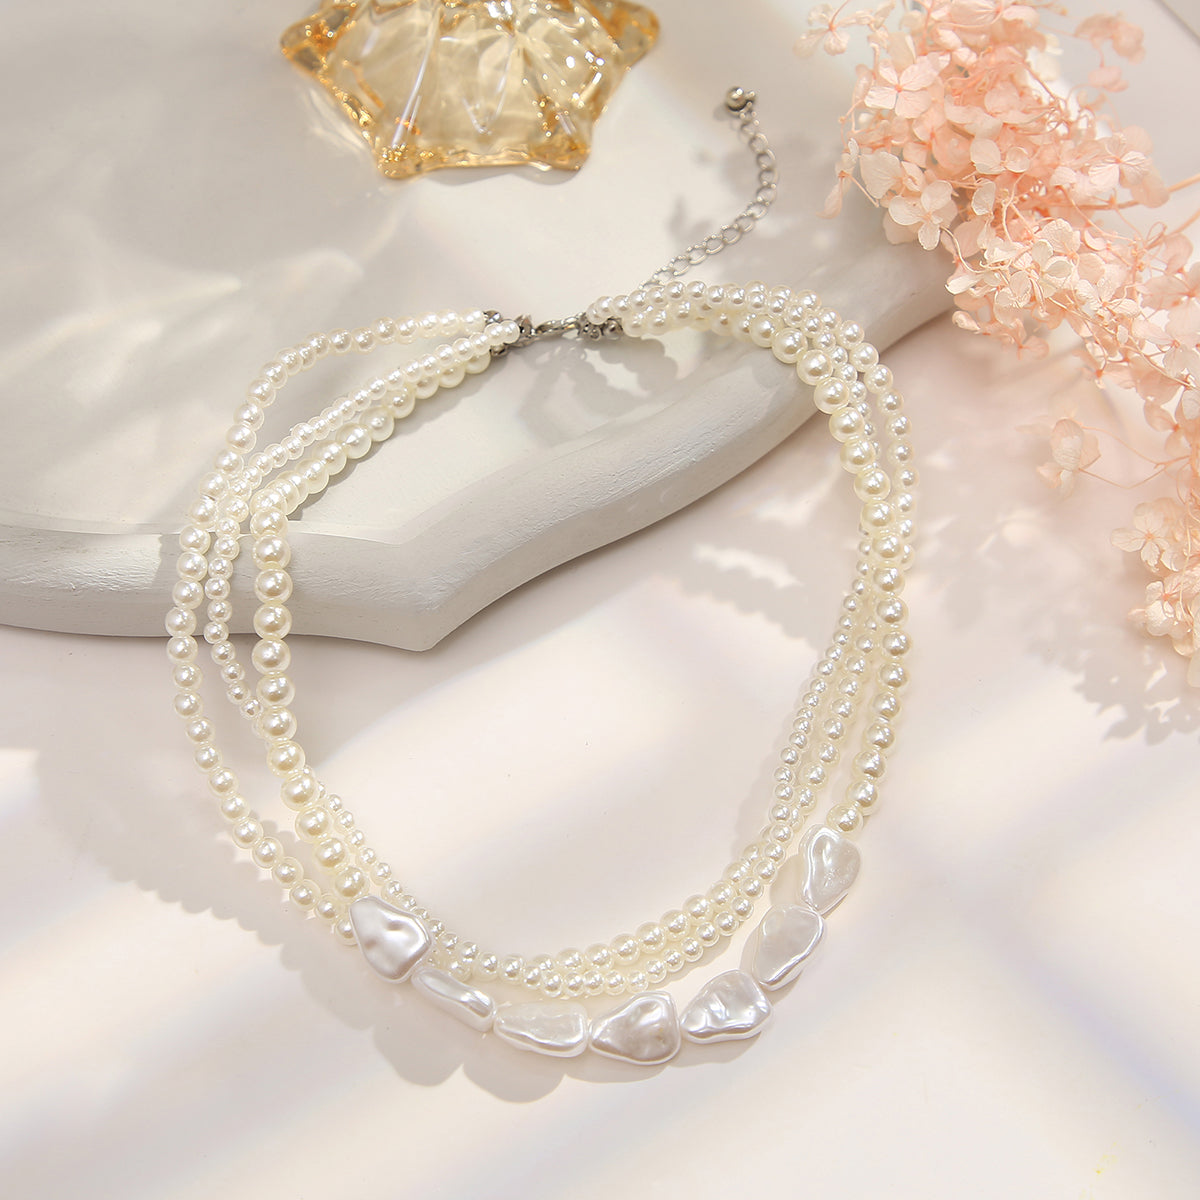 Pearl Layered Choker Necklace